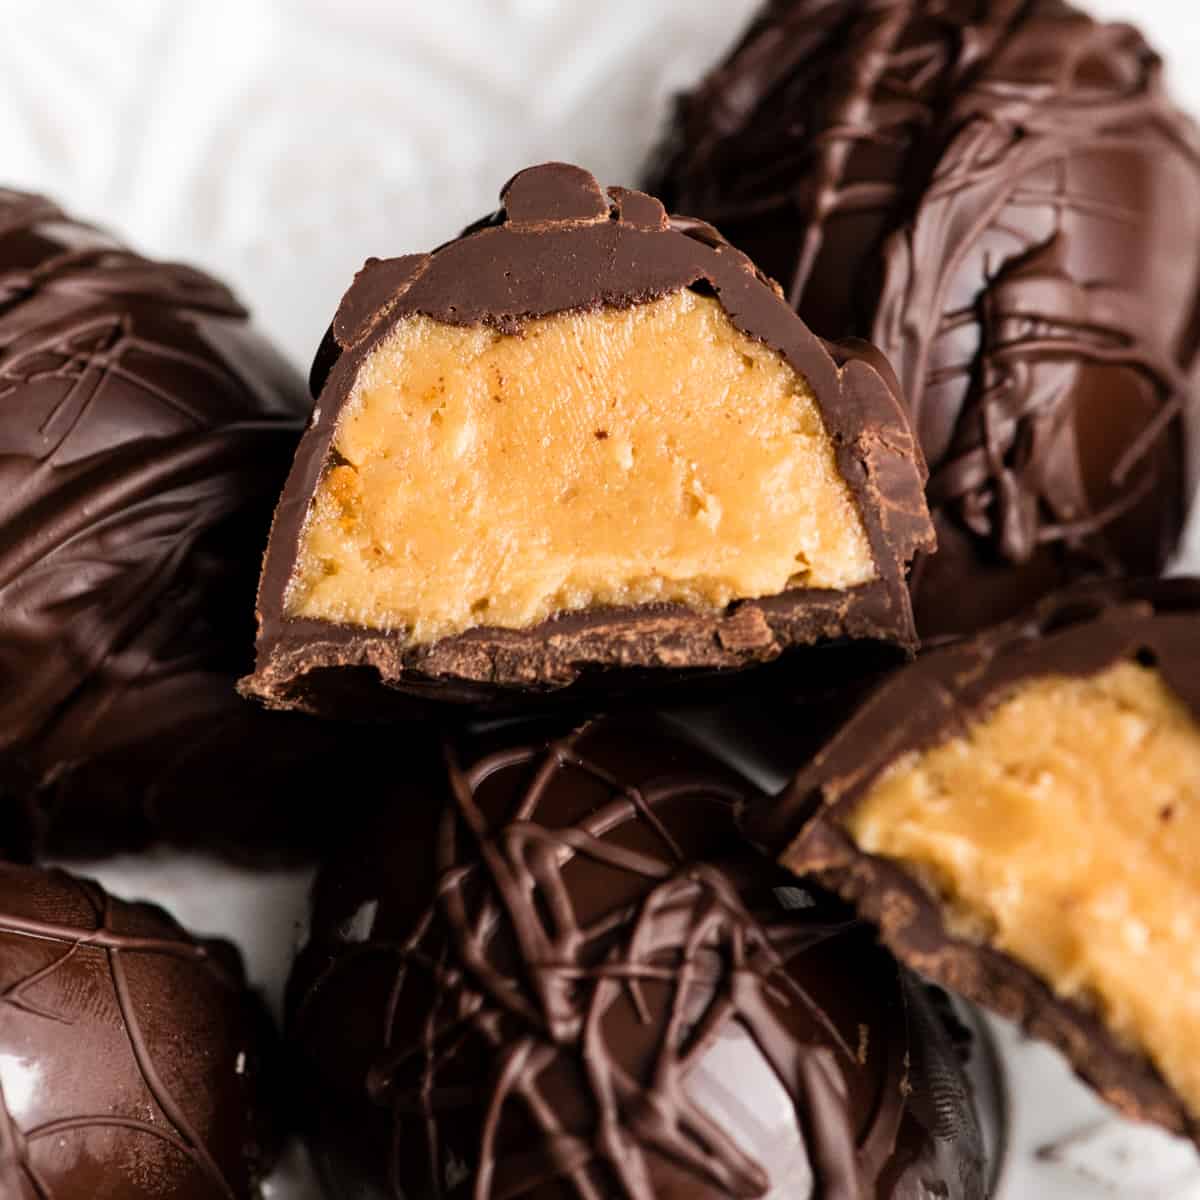 Close-up overhead view of the inside one vegan peanut butter egg cut in half. The halves are resting on 4 other uncut vegan peanut butter eggs 